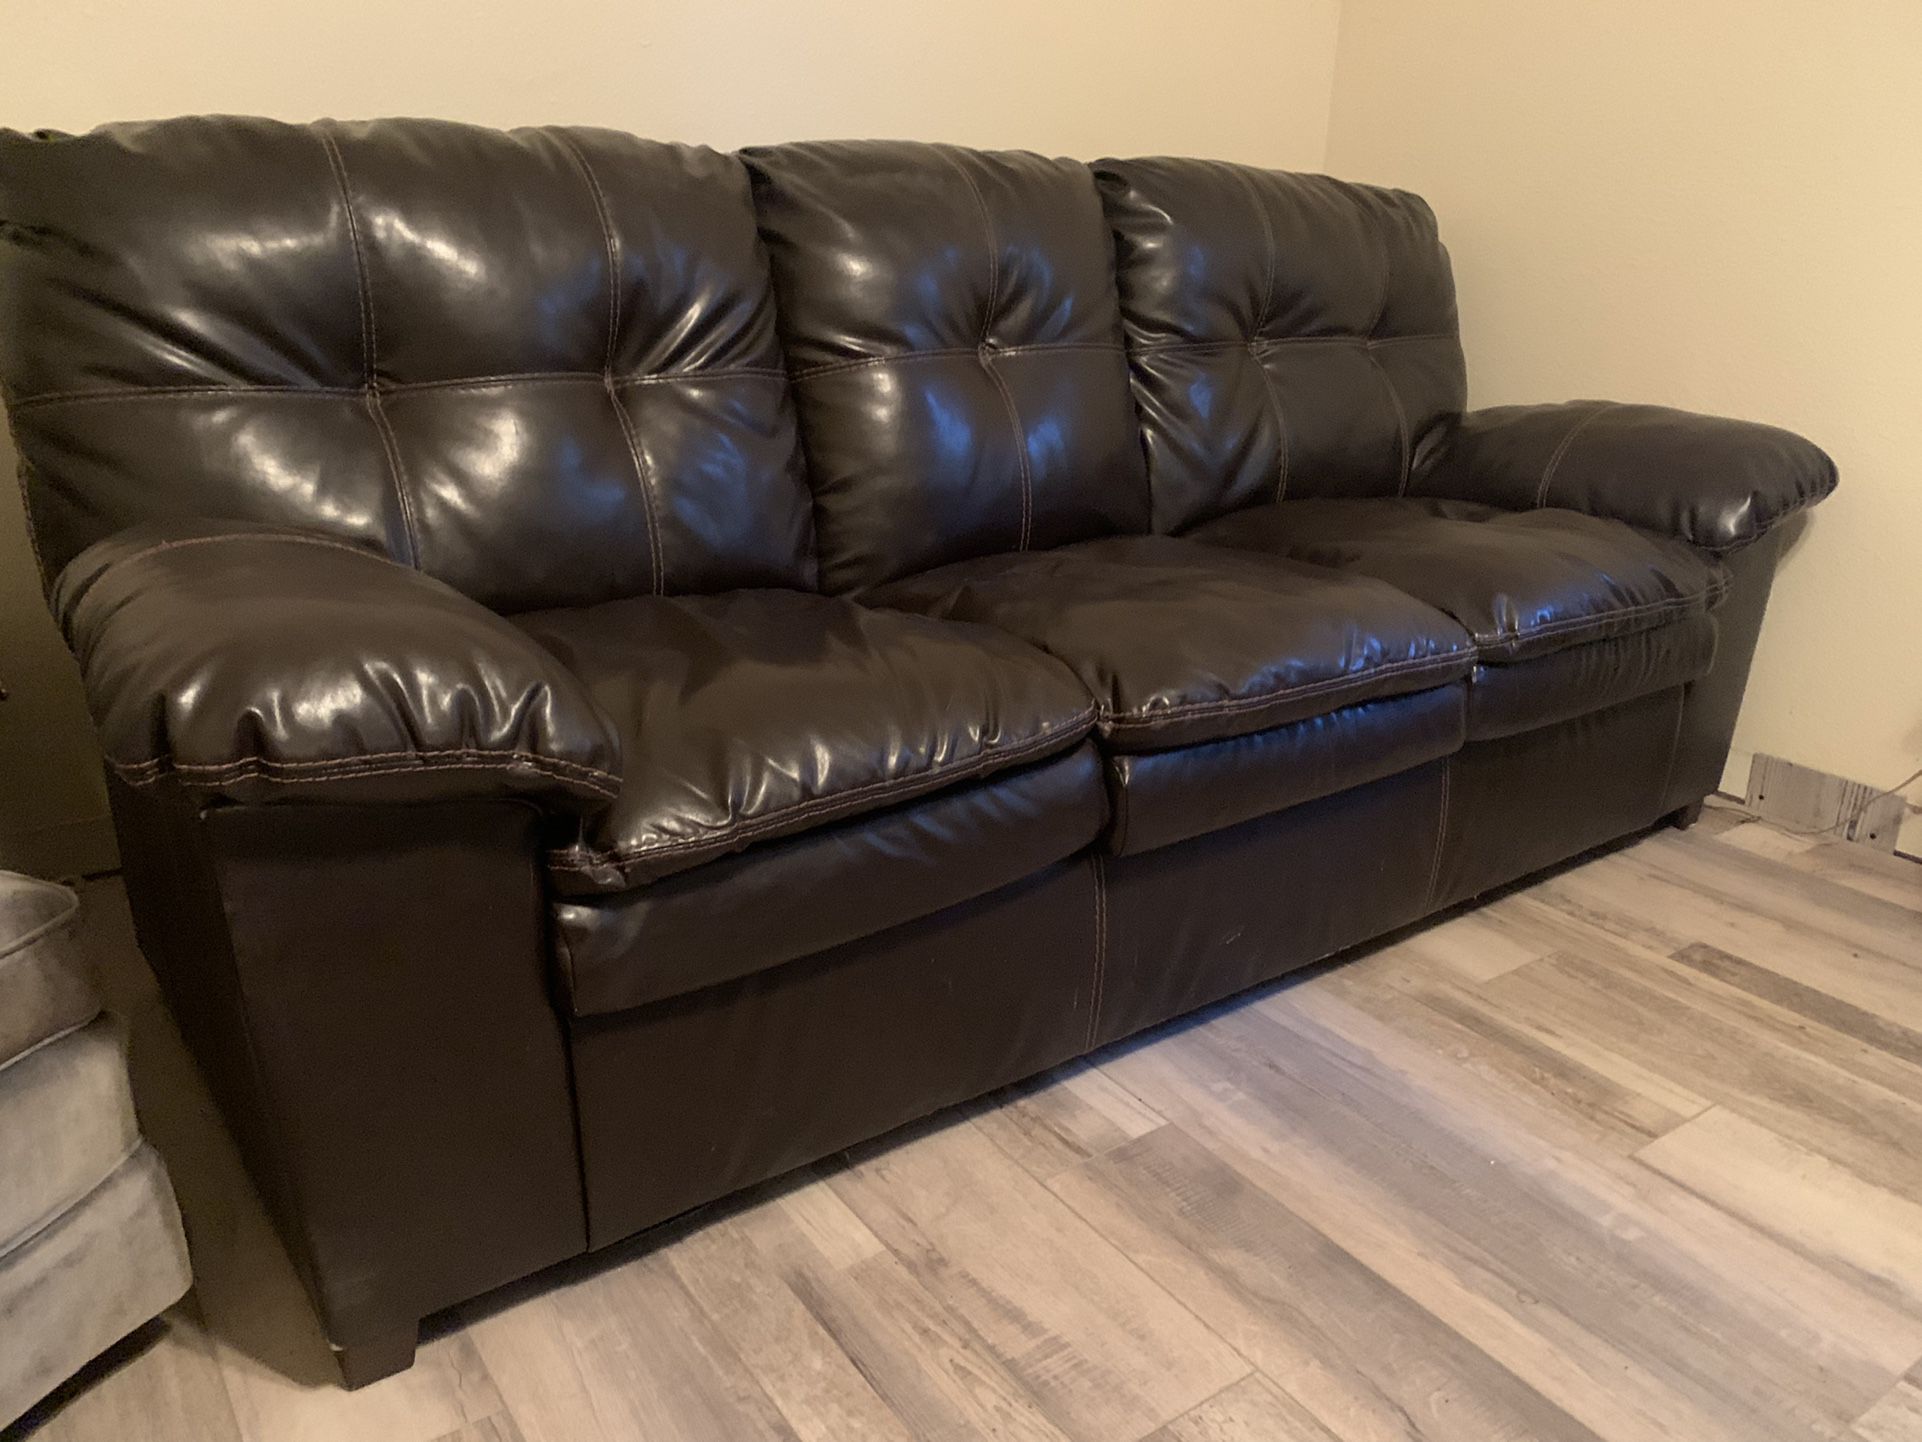 Couch For Sale Sooo Comfy! Hate To See It Go  Only Sits In Spare Room And Have New Plans That Don’t Include Couch 